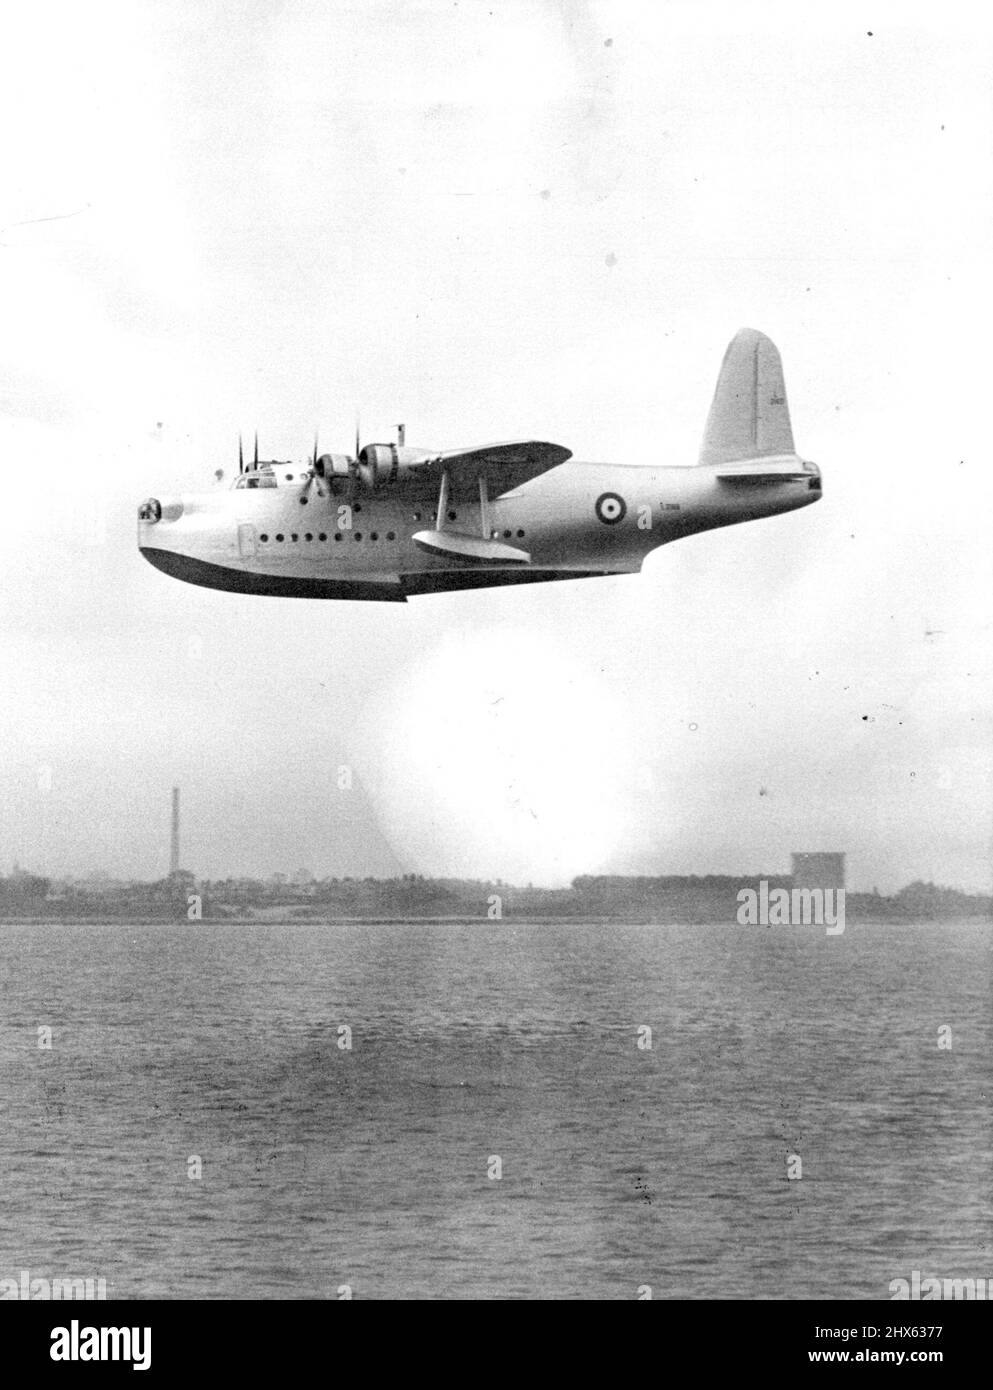 Britain's New Flying Battleship. Overall clean lines and four 1,000 h.p. Bristol Pegasus engines with three-blade variable pitch airs crews unite to give the new Sunderland flying boat high speed and long range - up to 3,000 miles. This aircraft is a military version of the Short flying boats which operate the main Empire air services, and is to re-equip R.A.F. sea-duty units. It is formidably armed, and has gun turrets fore and aft. June 2, 1938. Stock Photo